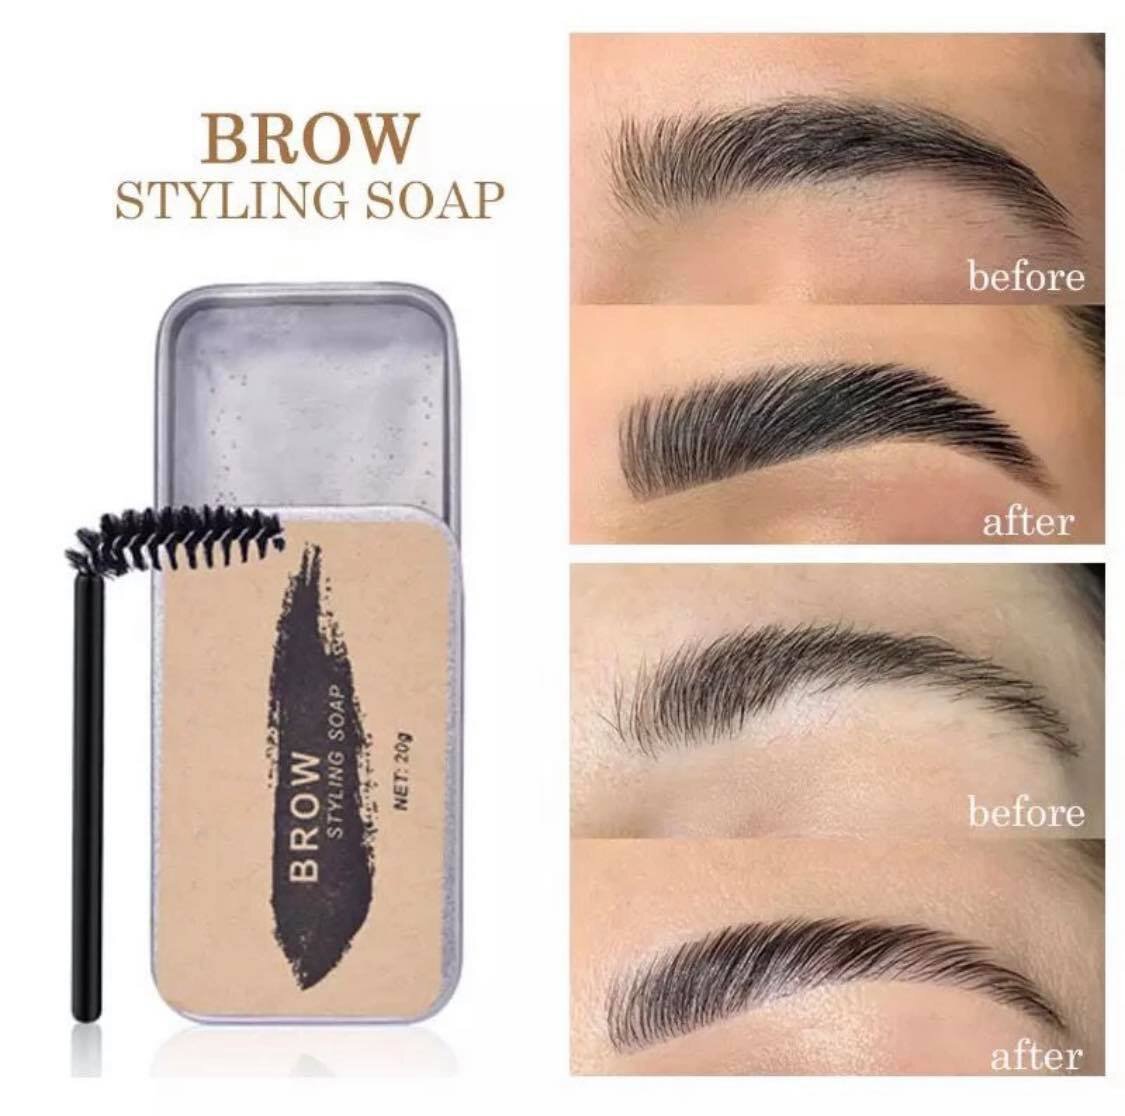 Brow styling soap